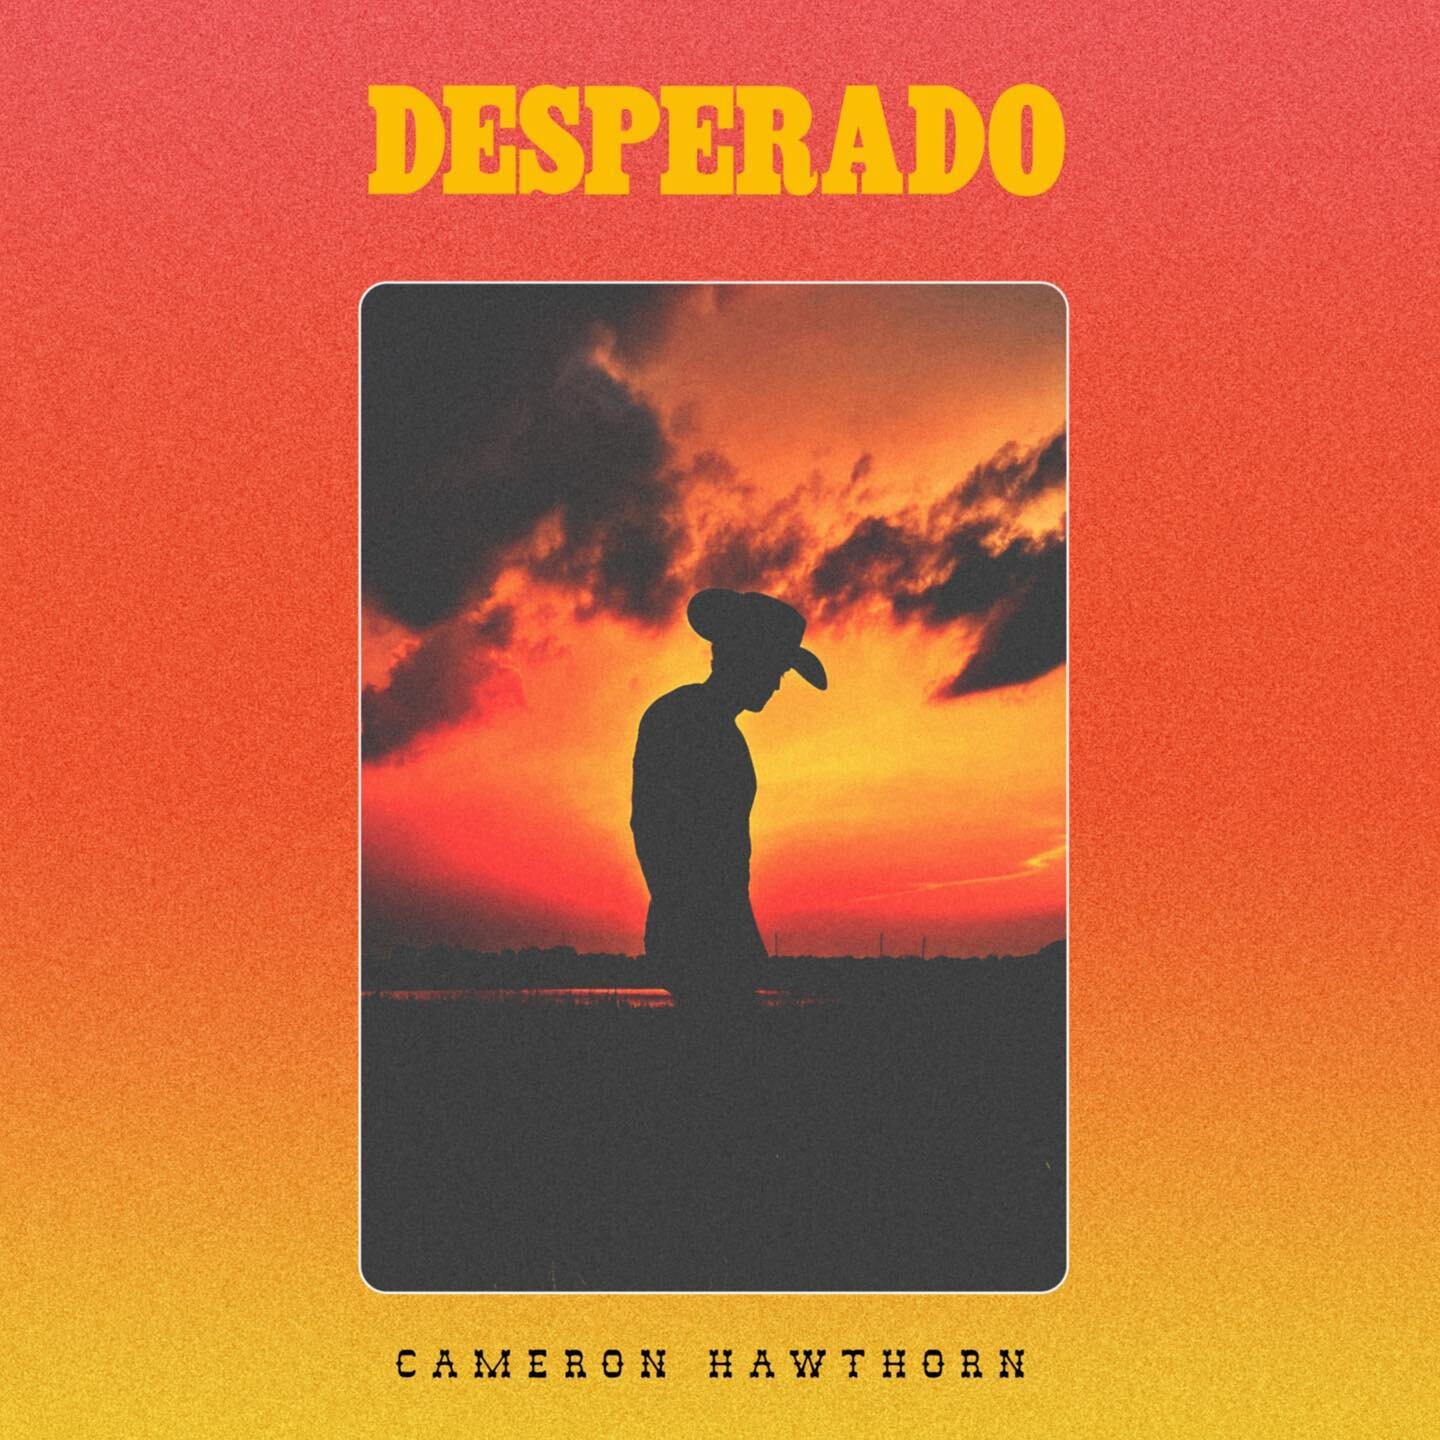 Let&rsquo;s keep it going y&rsquo;all. Pre-save &ldquo;Desperado&rdquo; coming this Friday, June 23. Link in story/bio.

Can&rsquo;t wait for you to hear my take on this classic. In the meantime, you should go listen to some of my favorite versions o